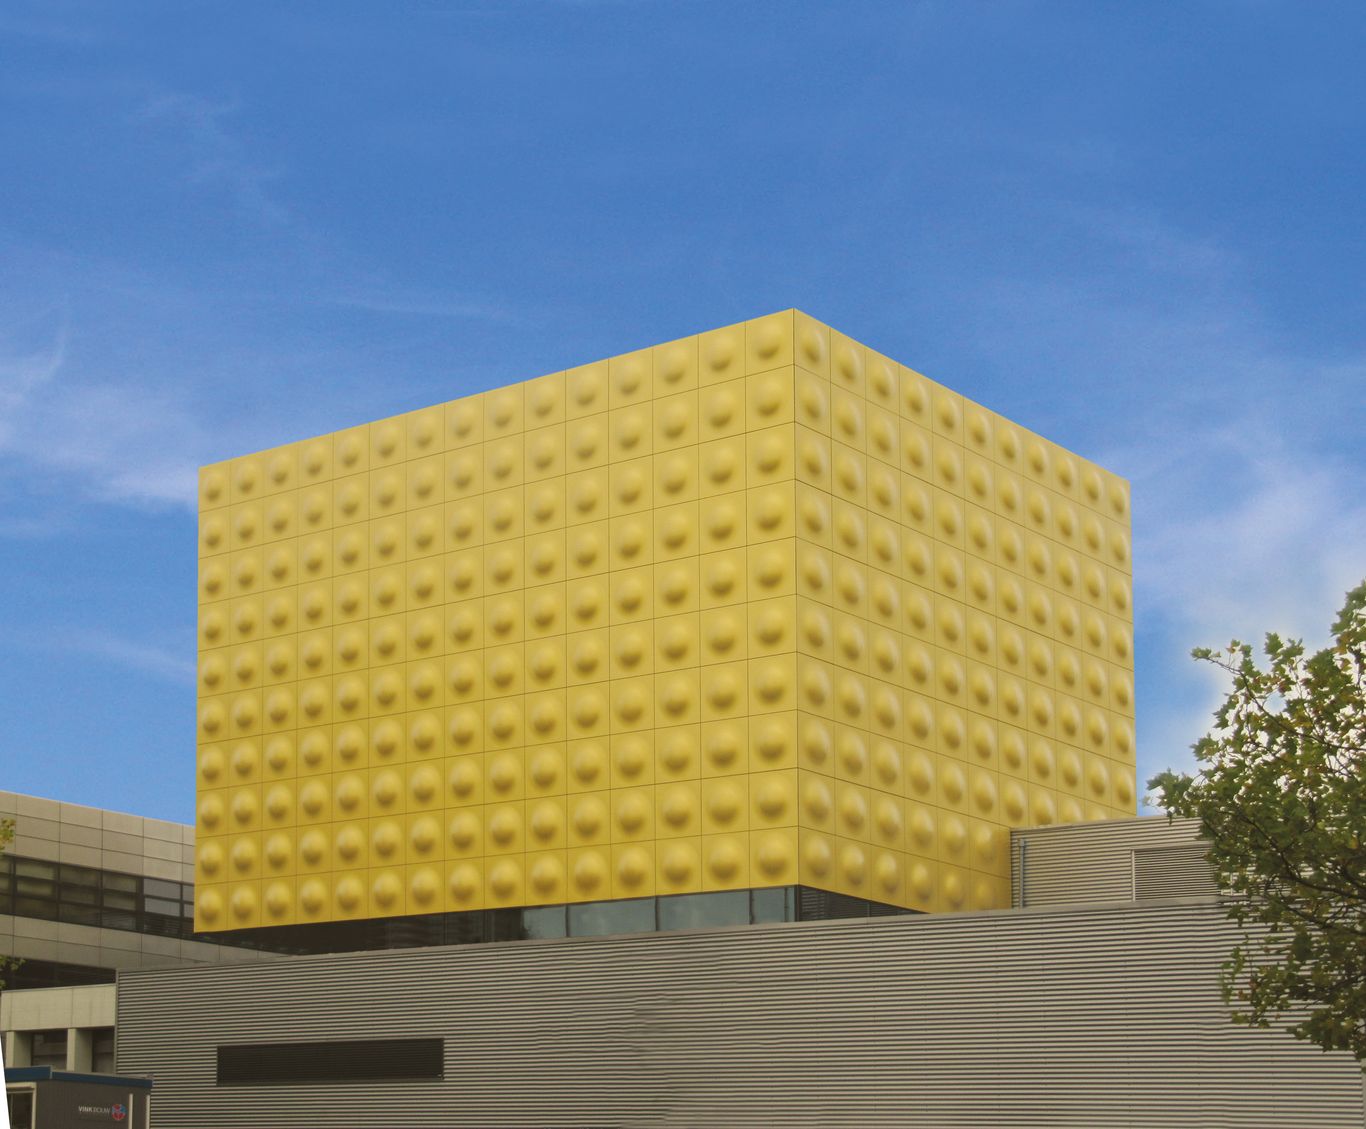 The building is yellow.